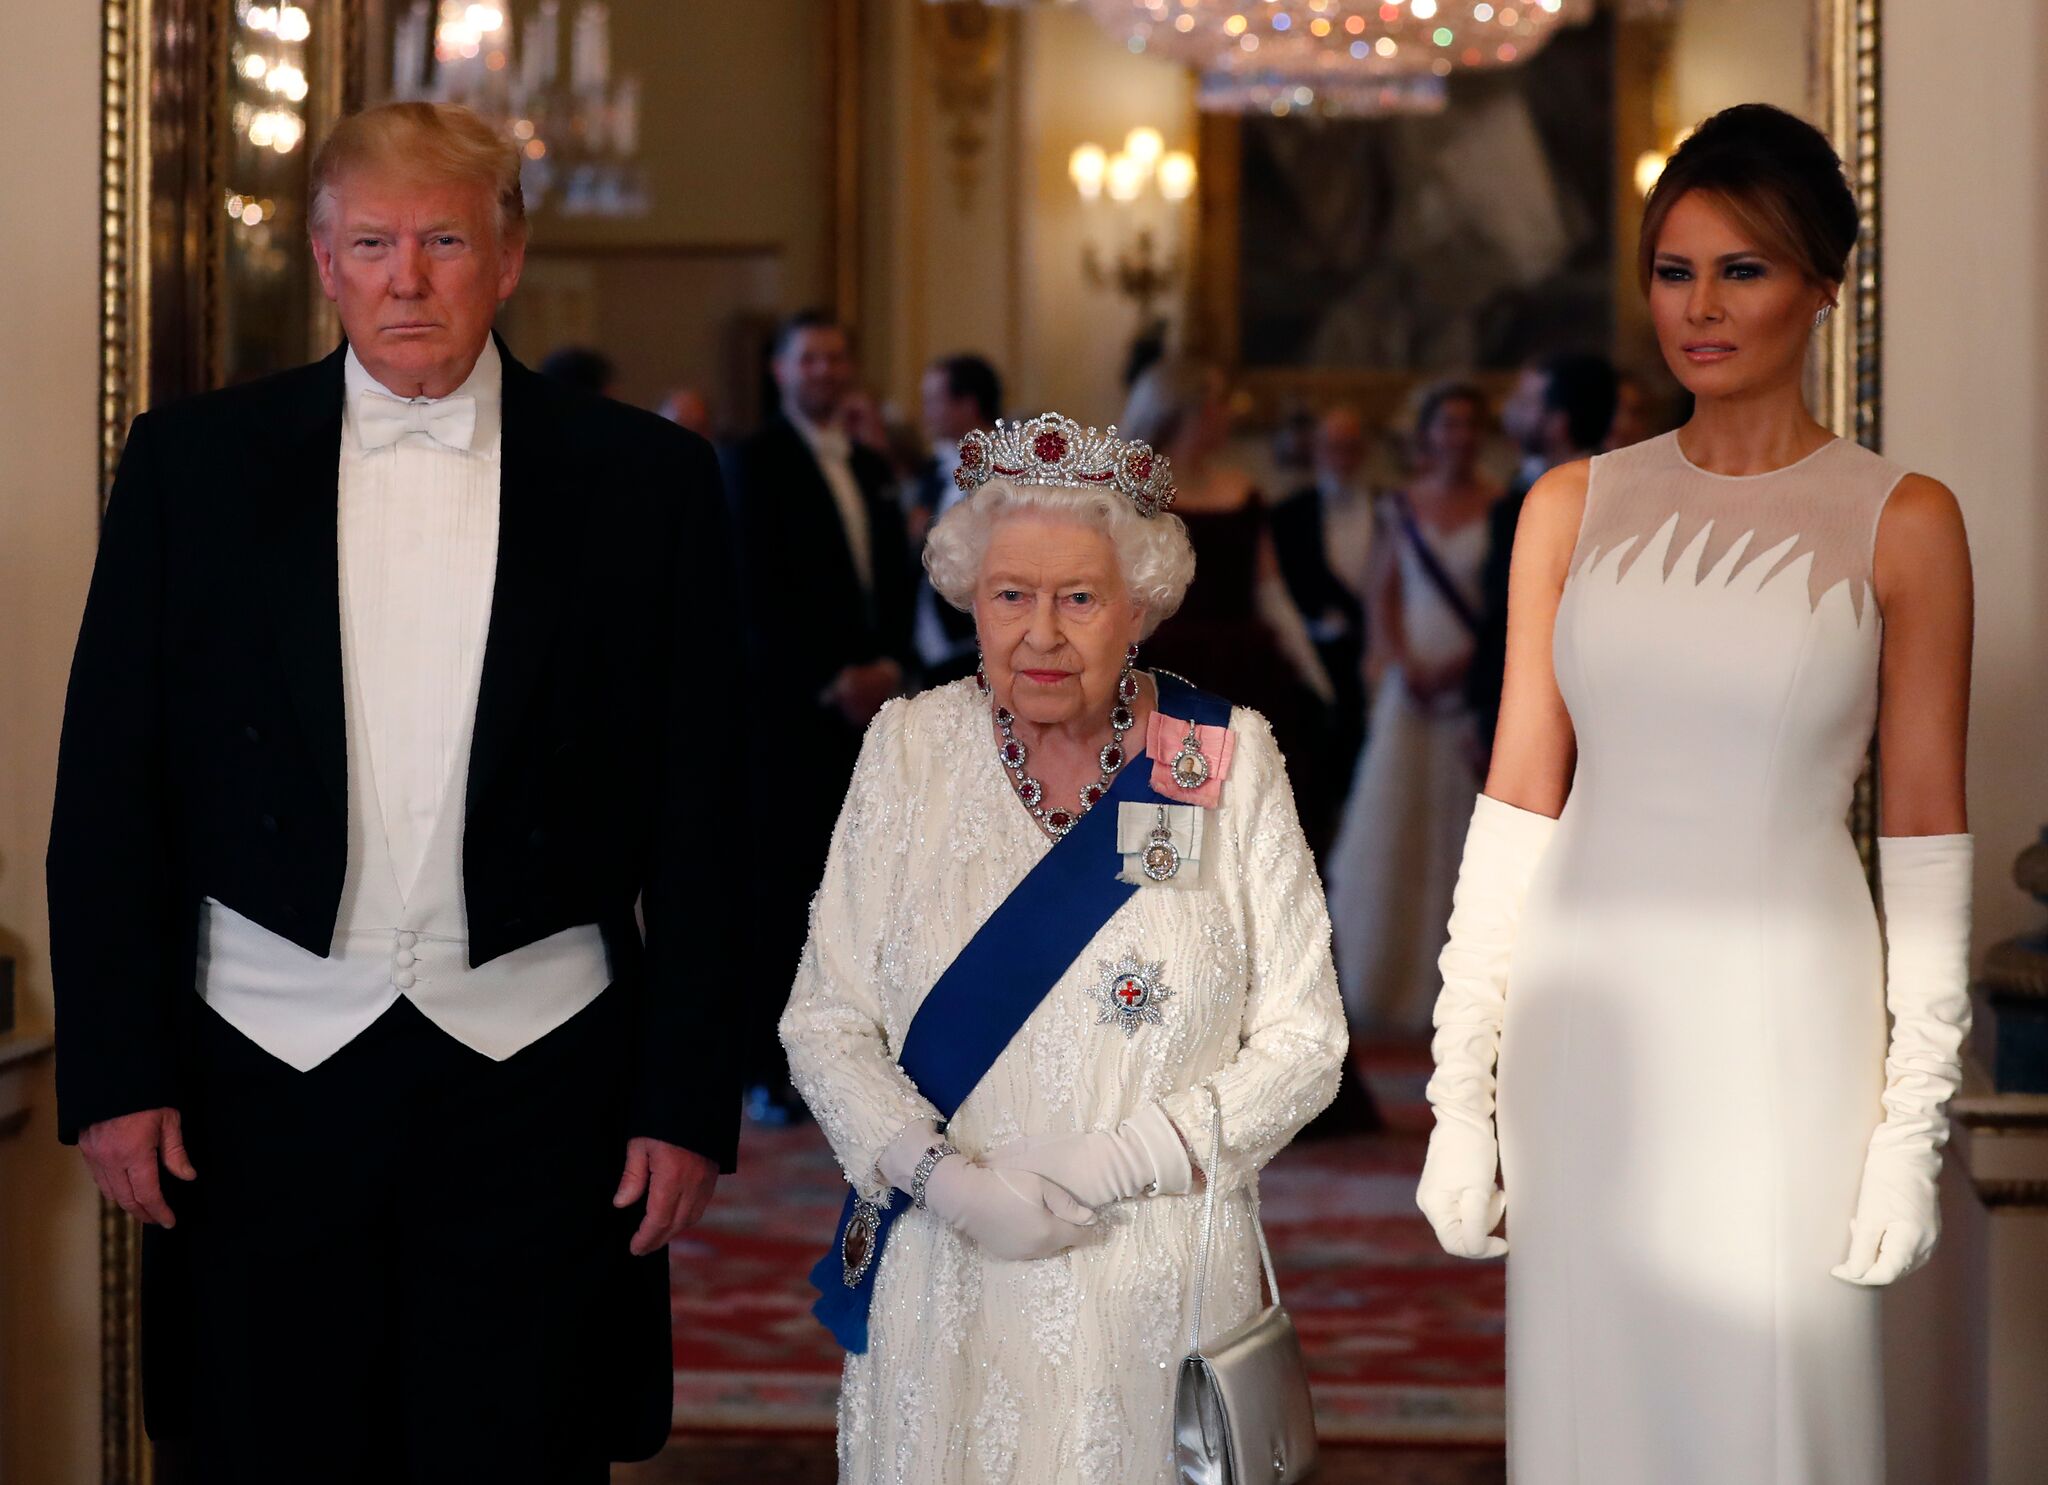 The Trumps meet the Queen during a state visit to the UK | Getty Images